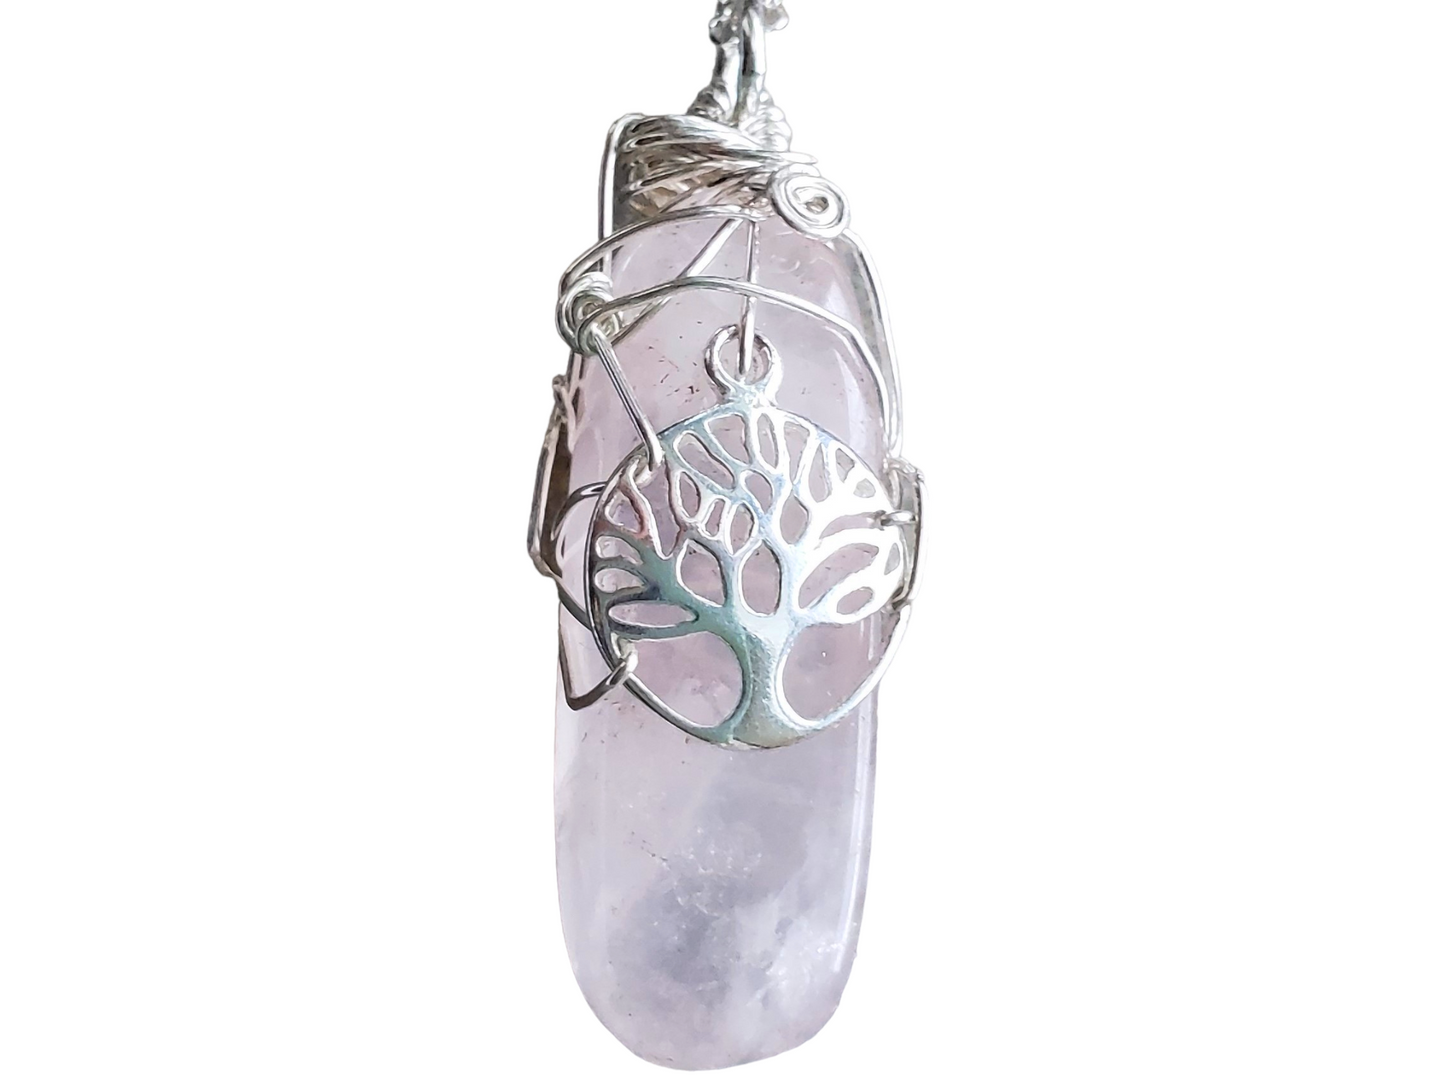 Strong and full of Faith Rose Quartz, Tree of Life Pendant Necklace, Wire wrapped pink gemstone with tree on chain.